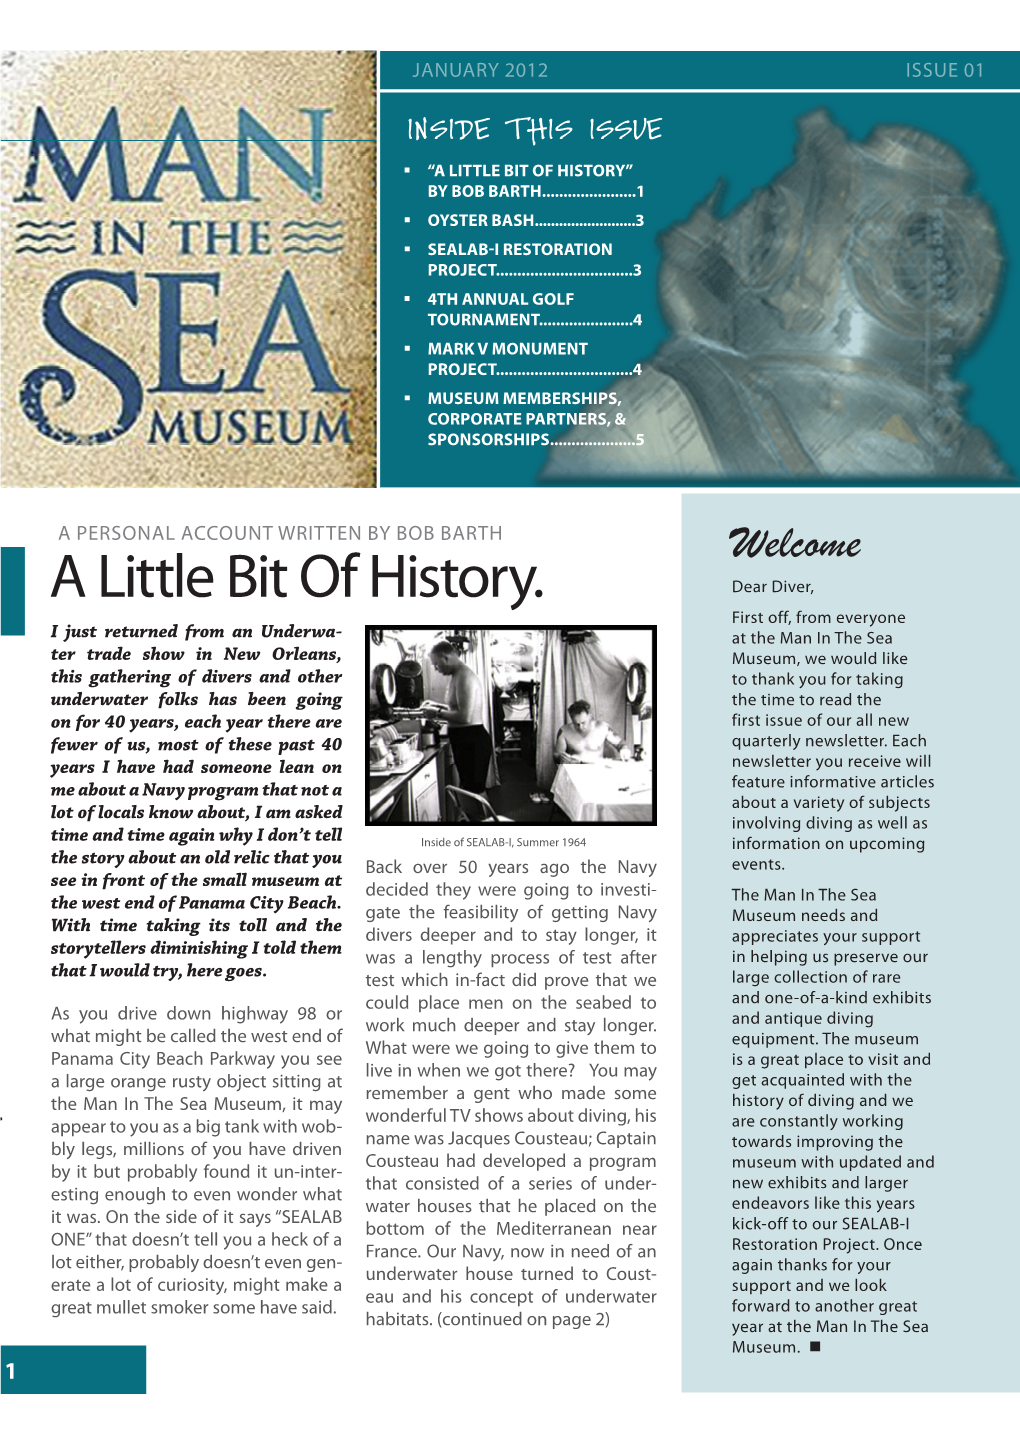 Man in the Sea Museum Newsletter Issue 2012 Vol. 1